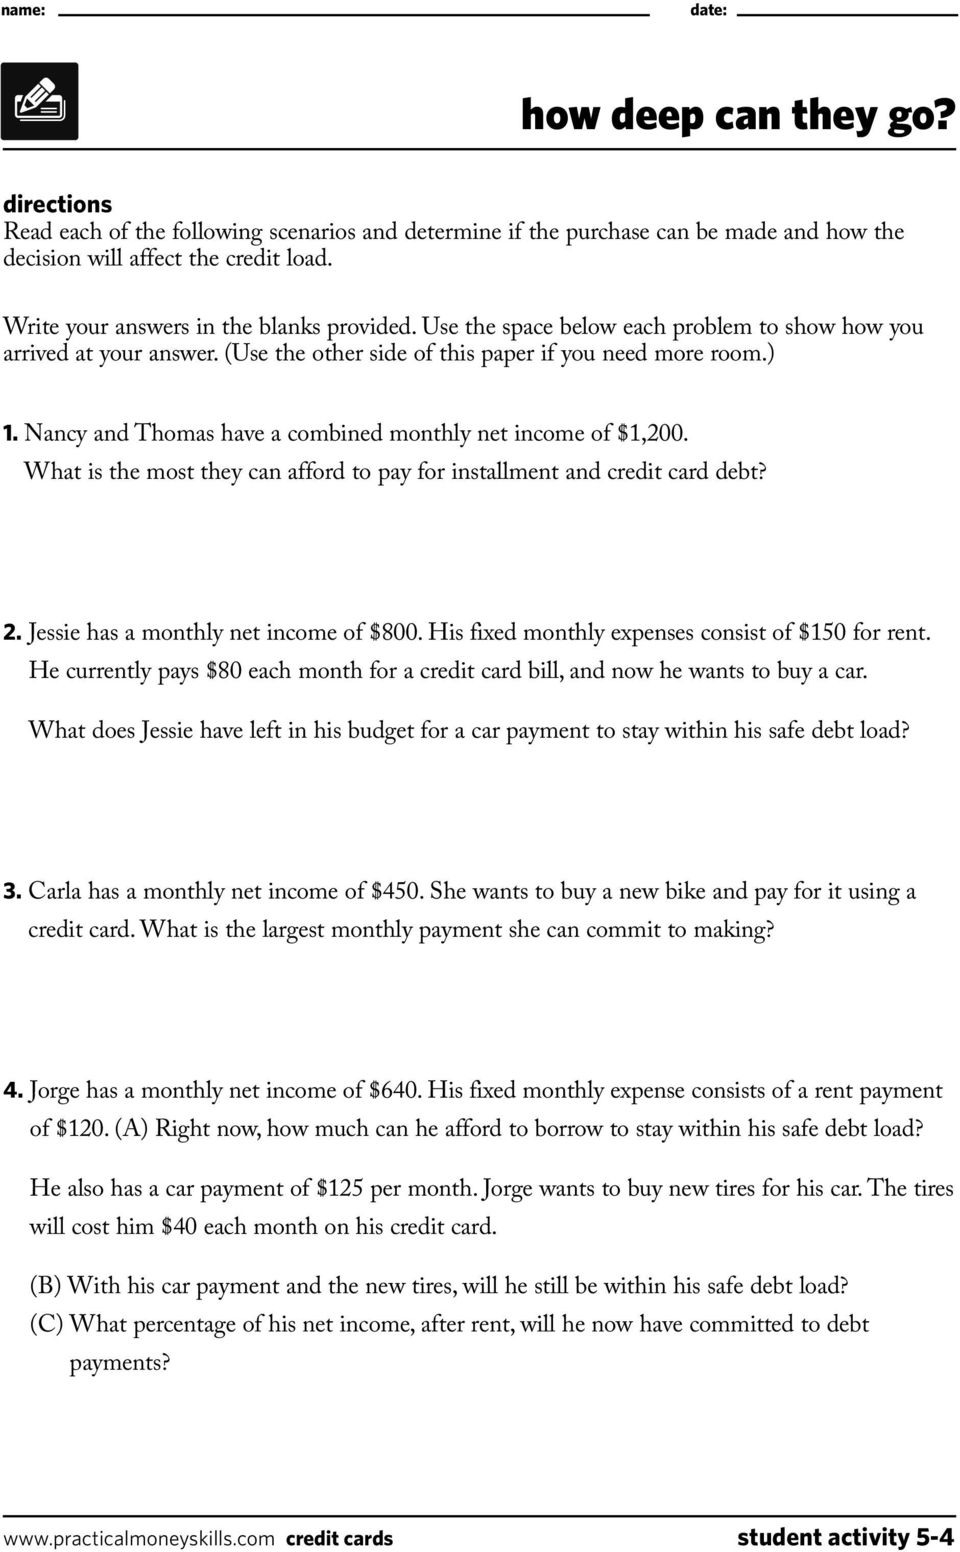 Student Activities Lesson Five Credit Cards 0409  Pdf